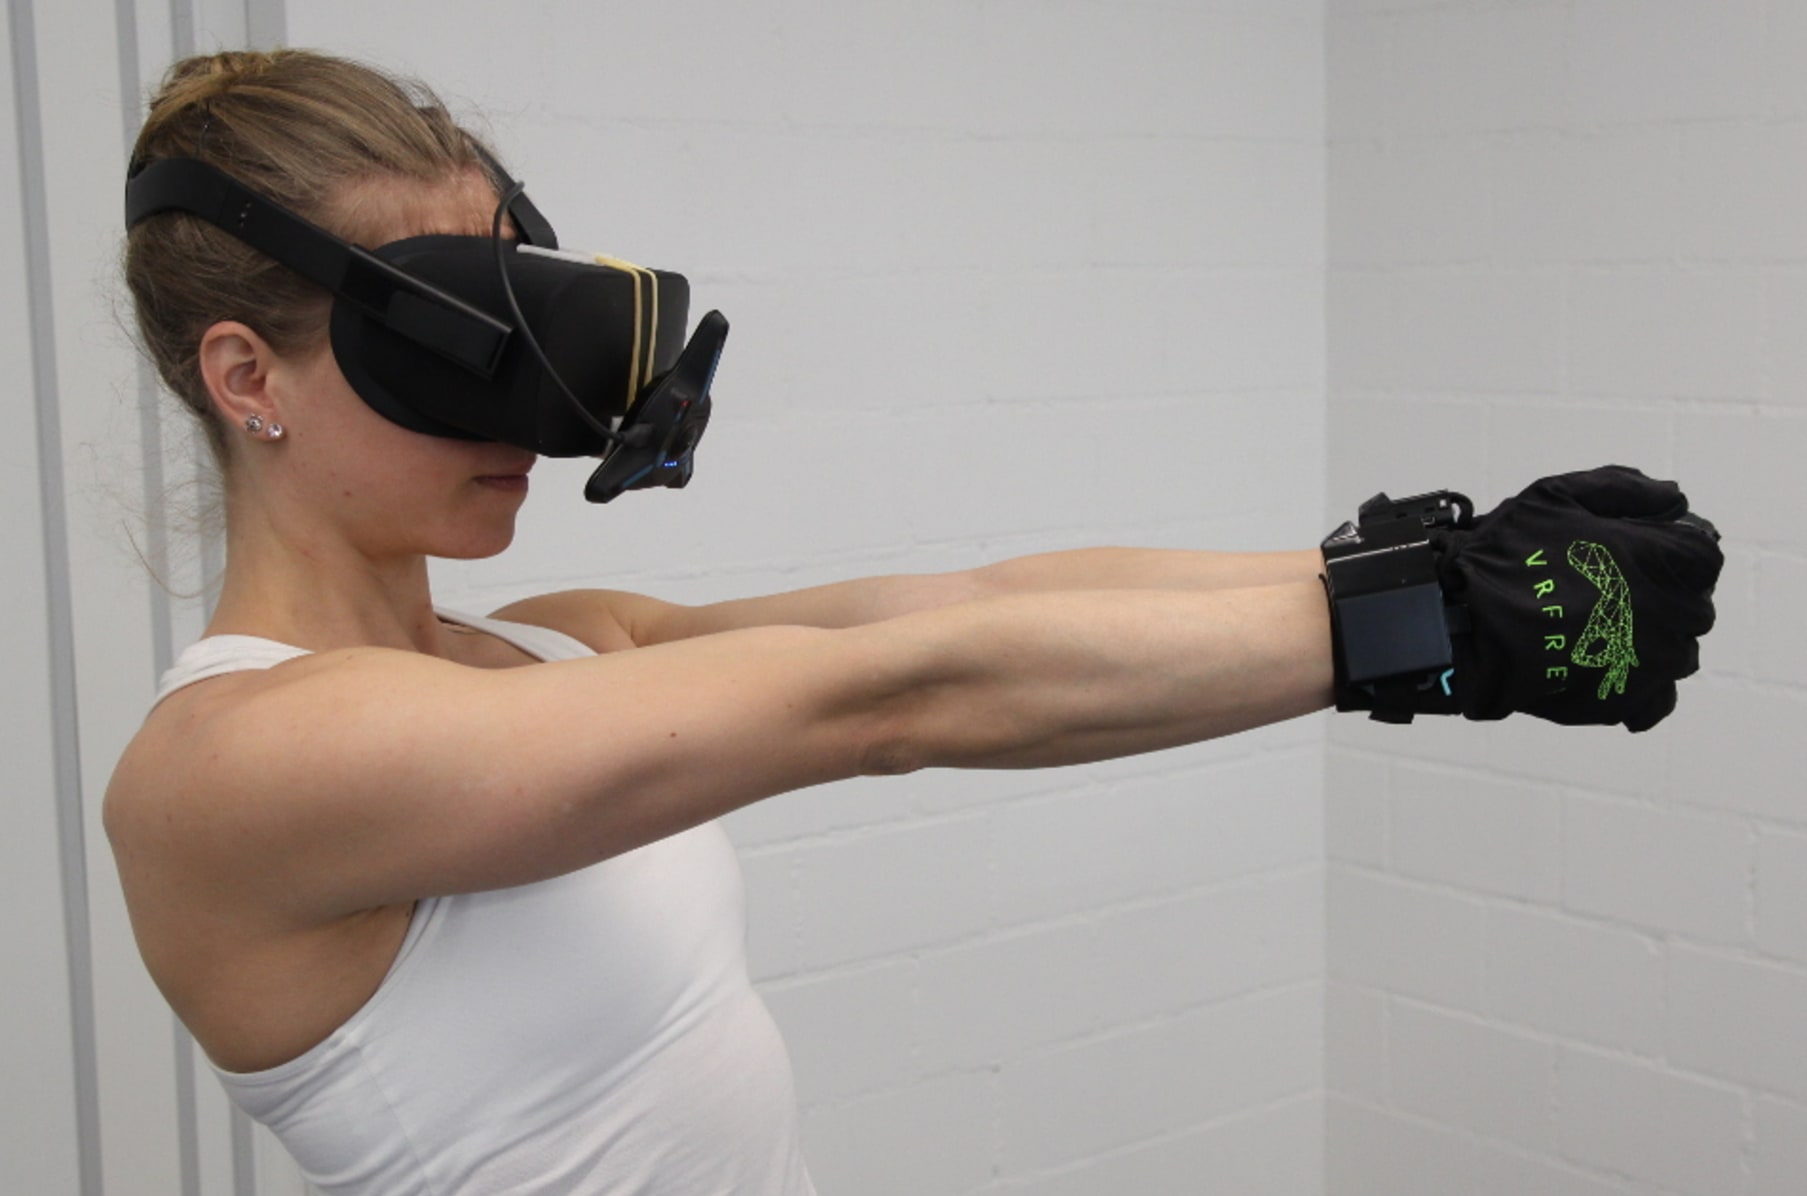 buffet Viewer To contribute VRfree glove system | Indiegogo